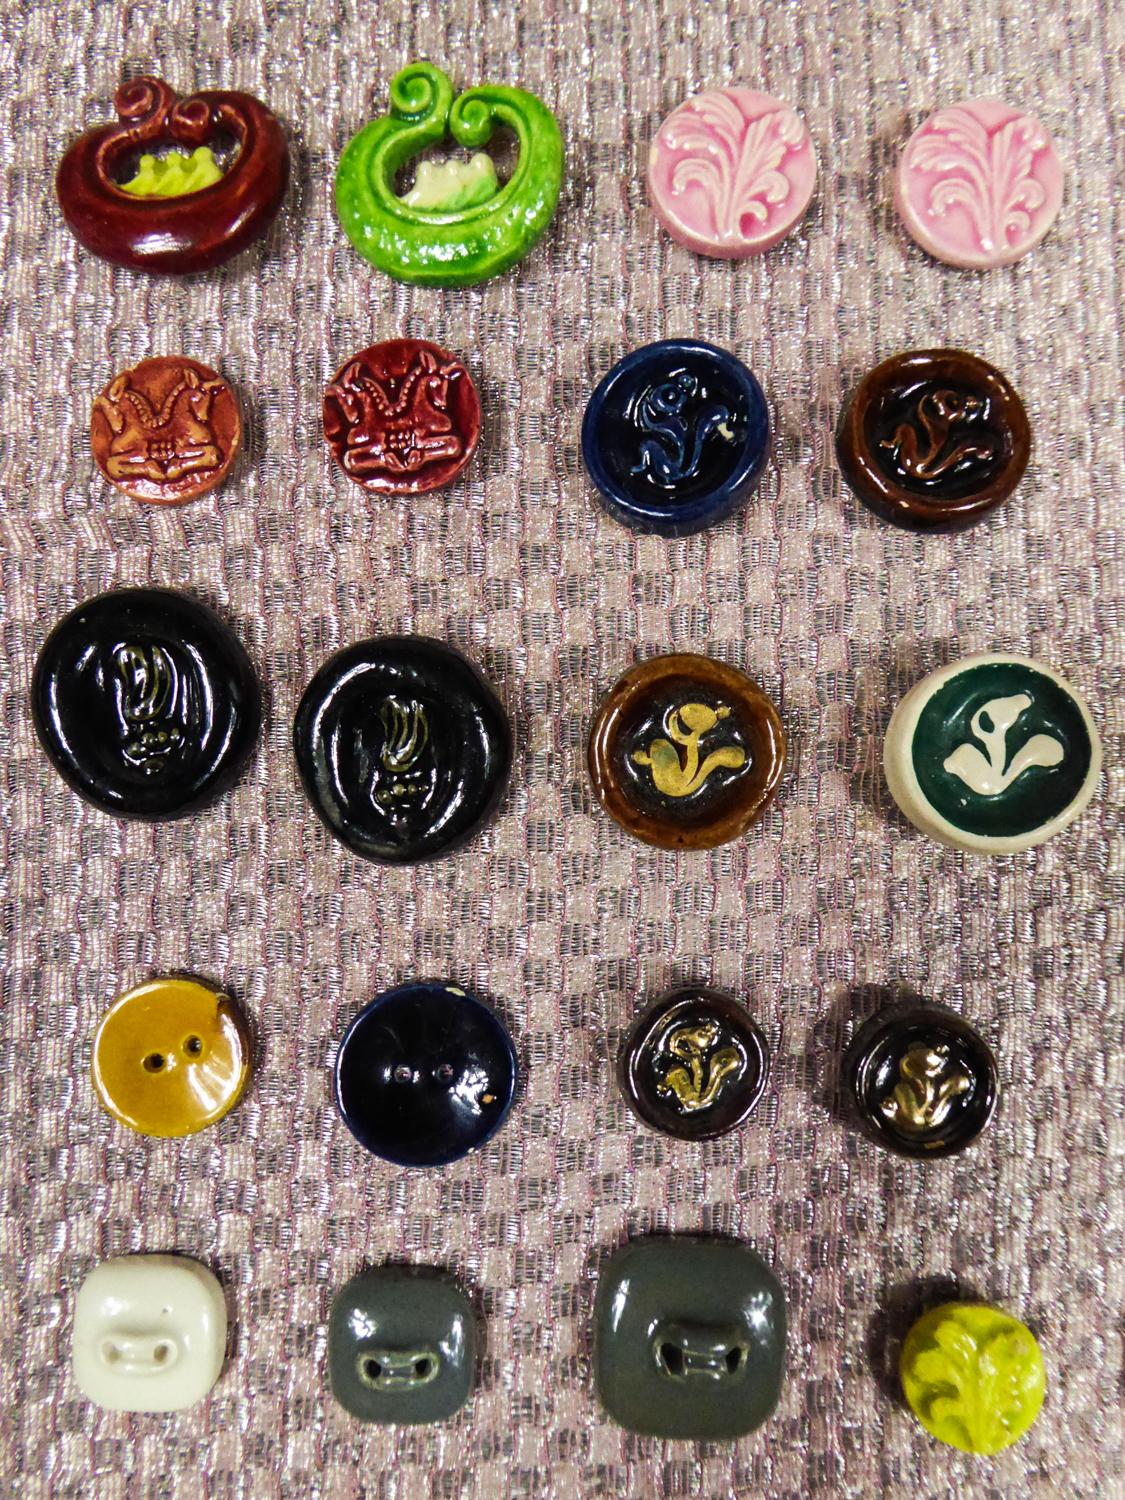 Circa 1930/1940
France

42 glazed ceramic buttons possibly by Jean Clément for The house designer Elsa Schiaparelli from the 1930s / 1940s. Oneiric repertoire (Zodiac, Noah's Ark, Swans, false cameos) and surreal (upside down buttons, tennis ball